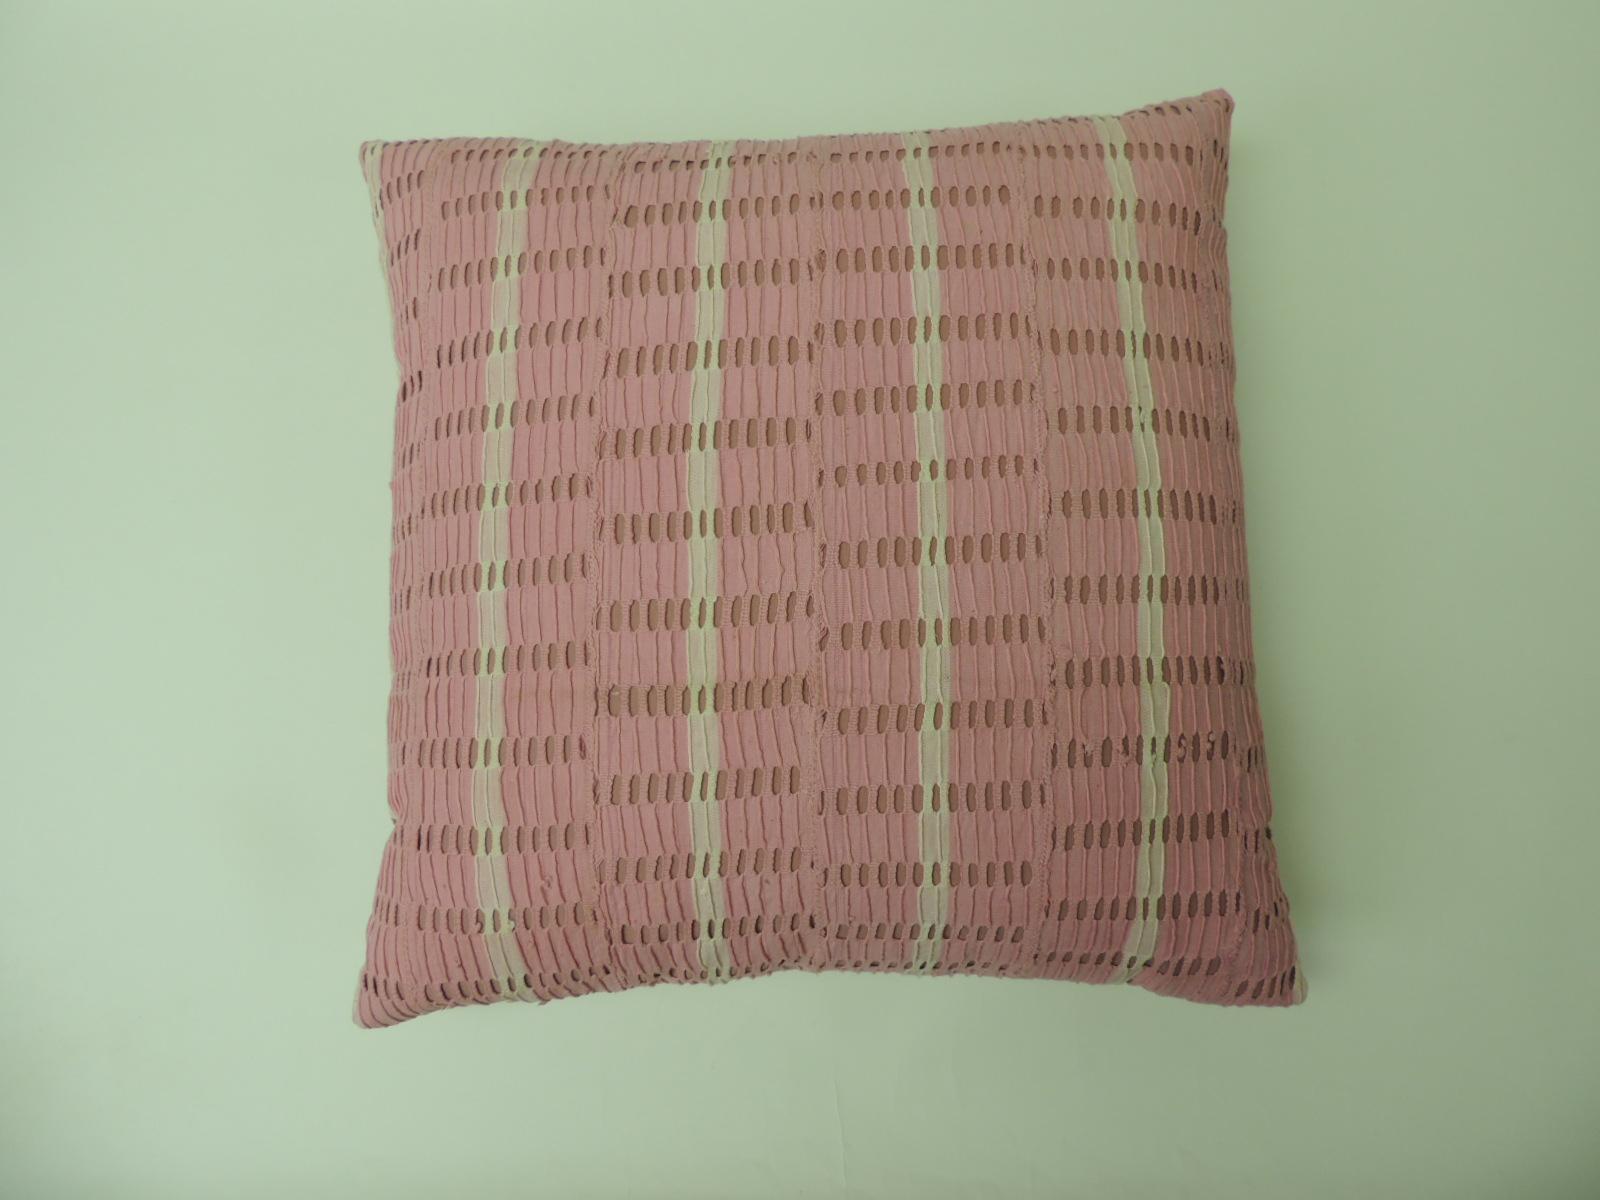 Cotton Vintage Pink and Natural African Woven Decorative Throw Pillows